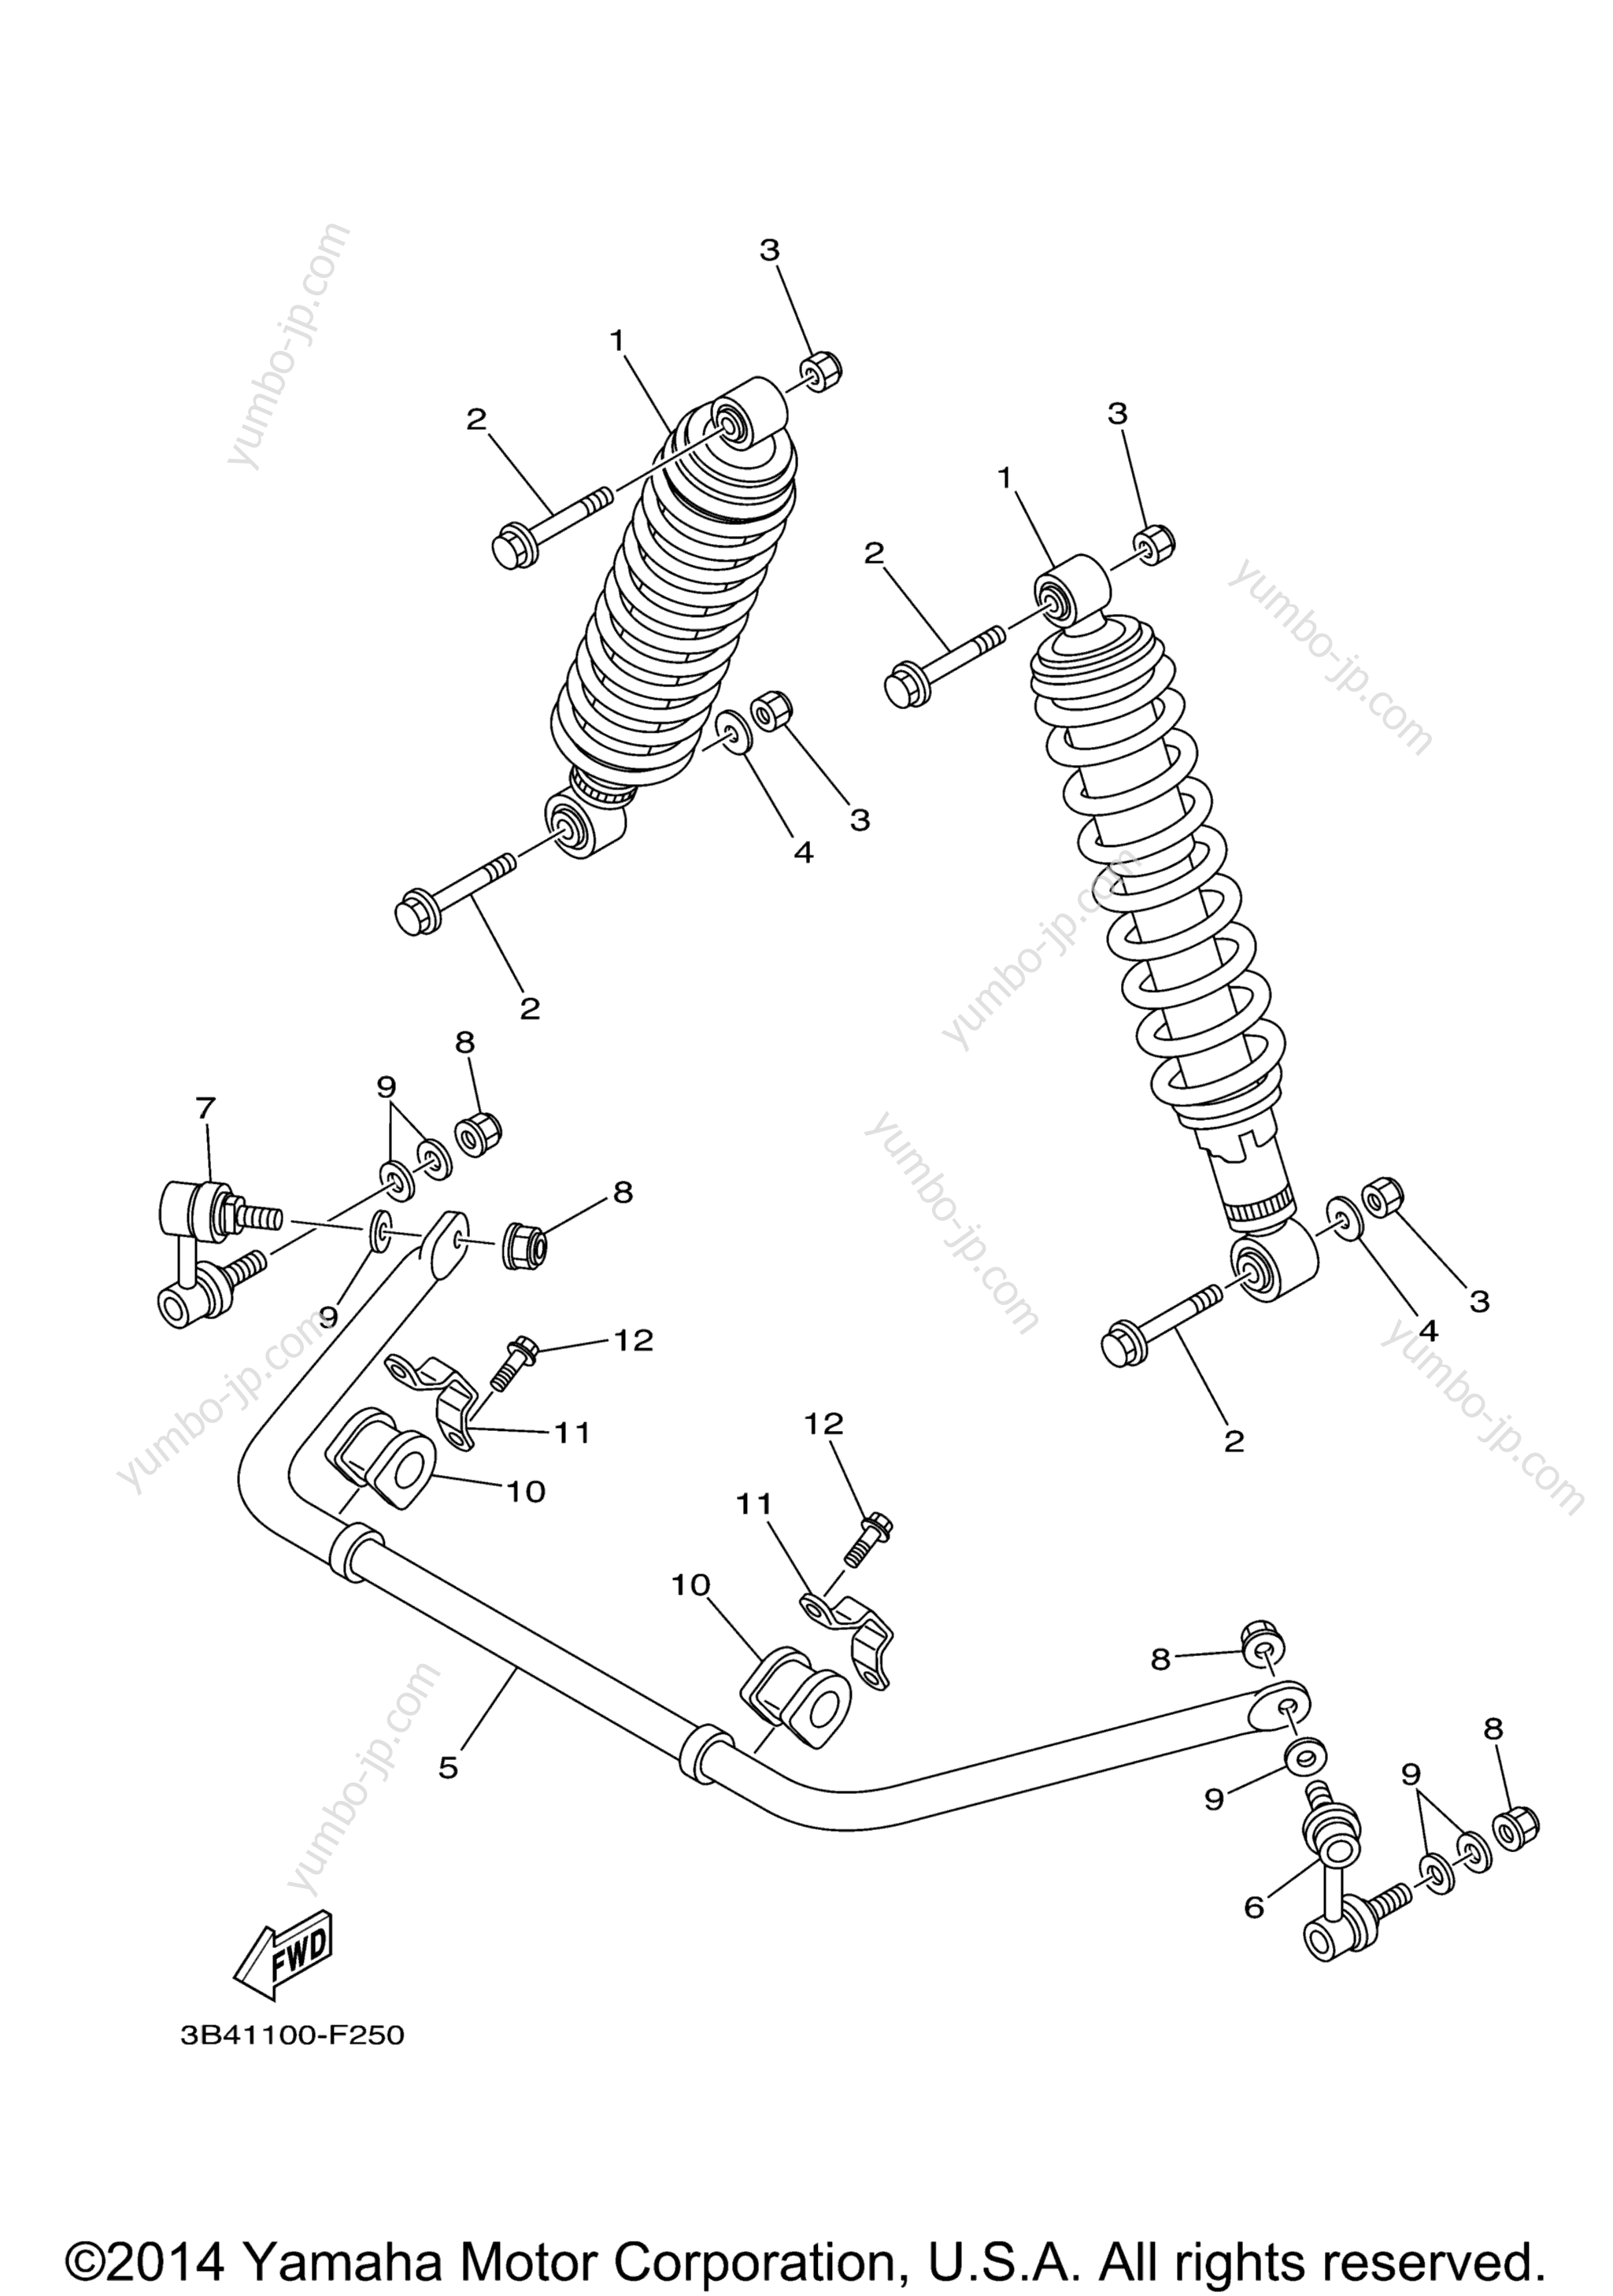 Rear Suspension for ATVs YAMAHA GRIZZLY 550 FI 4WD HUNTER (YFM5FGHY) 2009 year